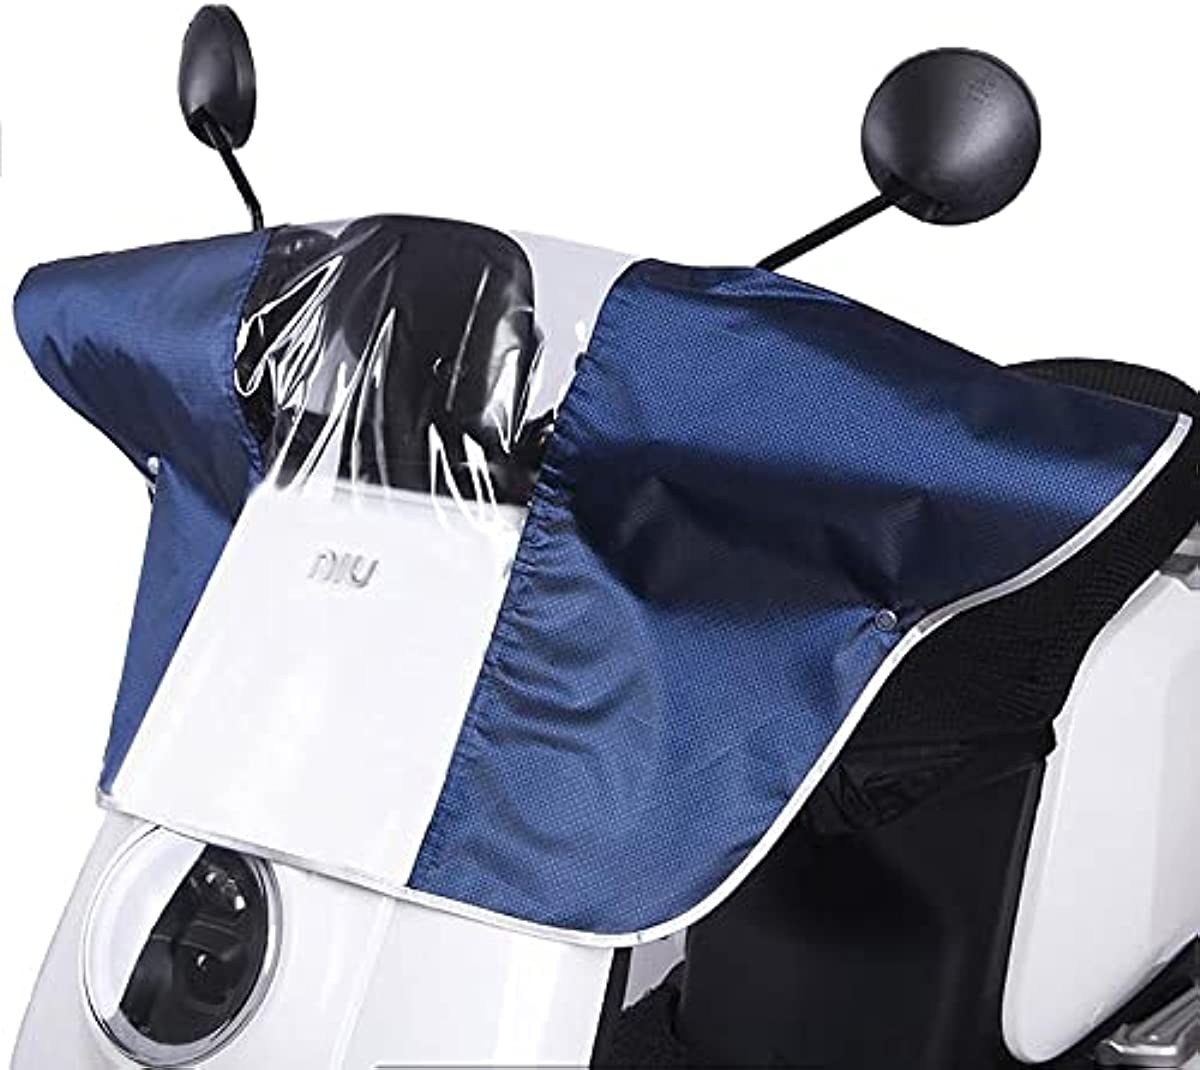 LU2000 Mobility Scooter Control Panel Cover, Tiller Waterproof Panels Case, Electric Bike Center Control Dust Waterproof Cover Rain Enclosure Large Size